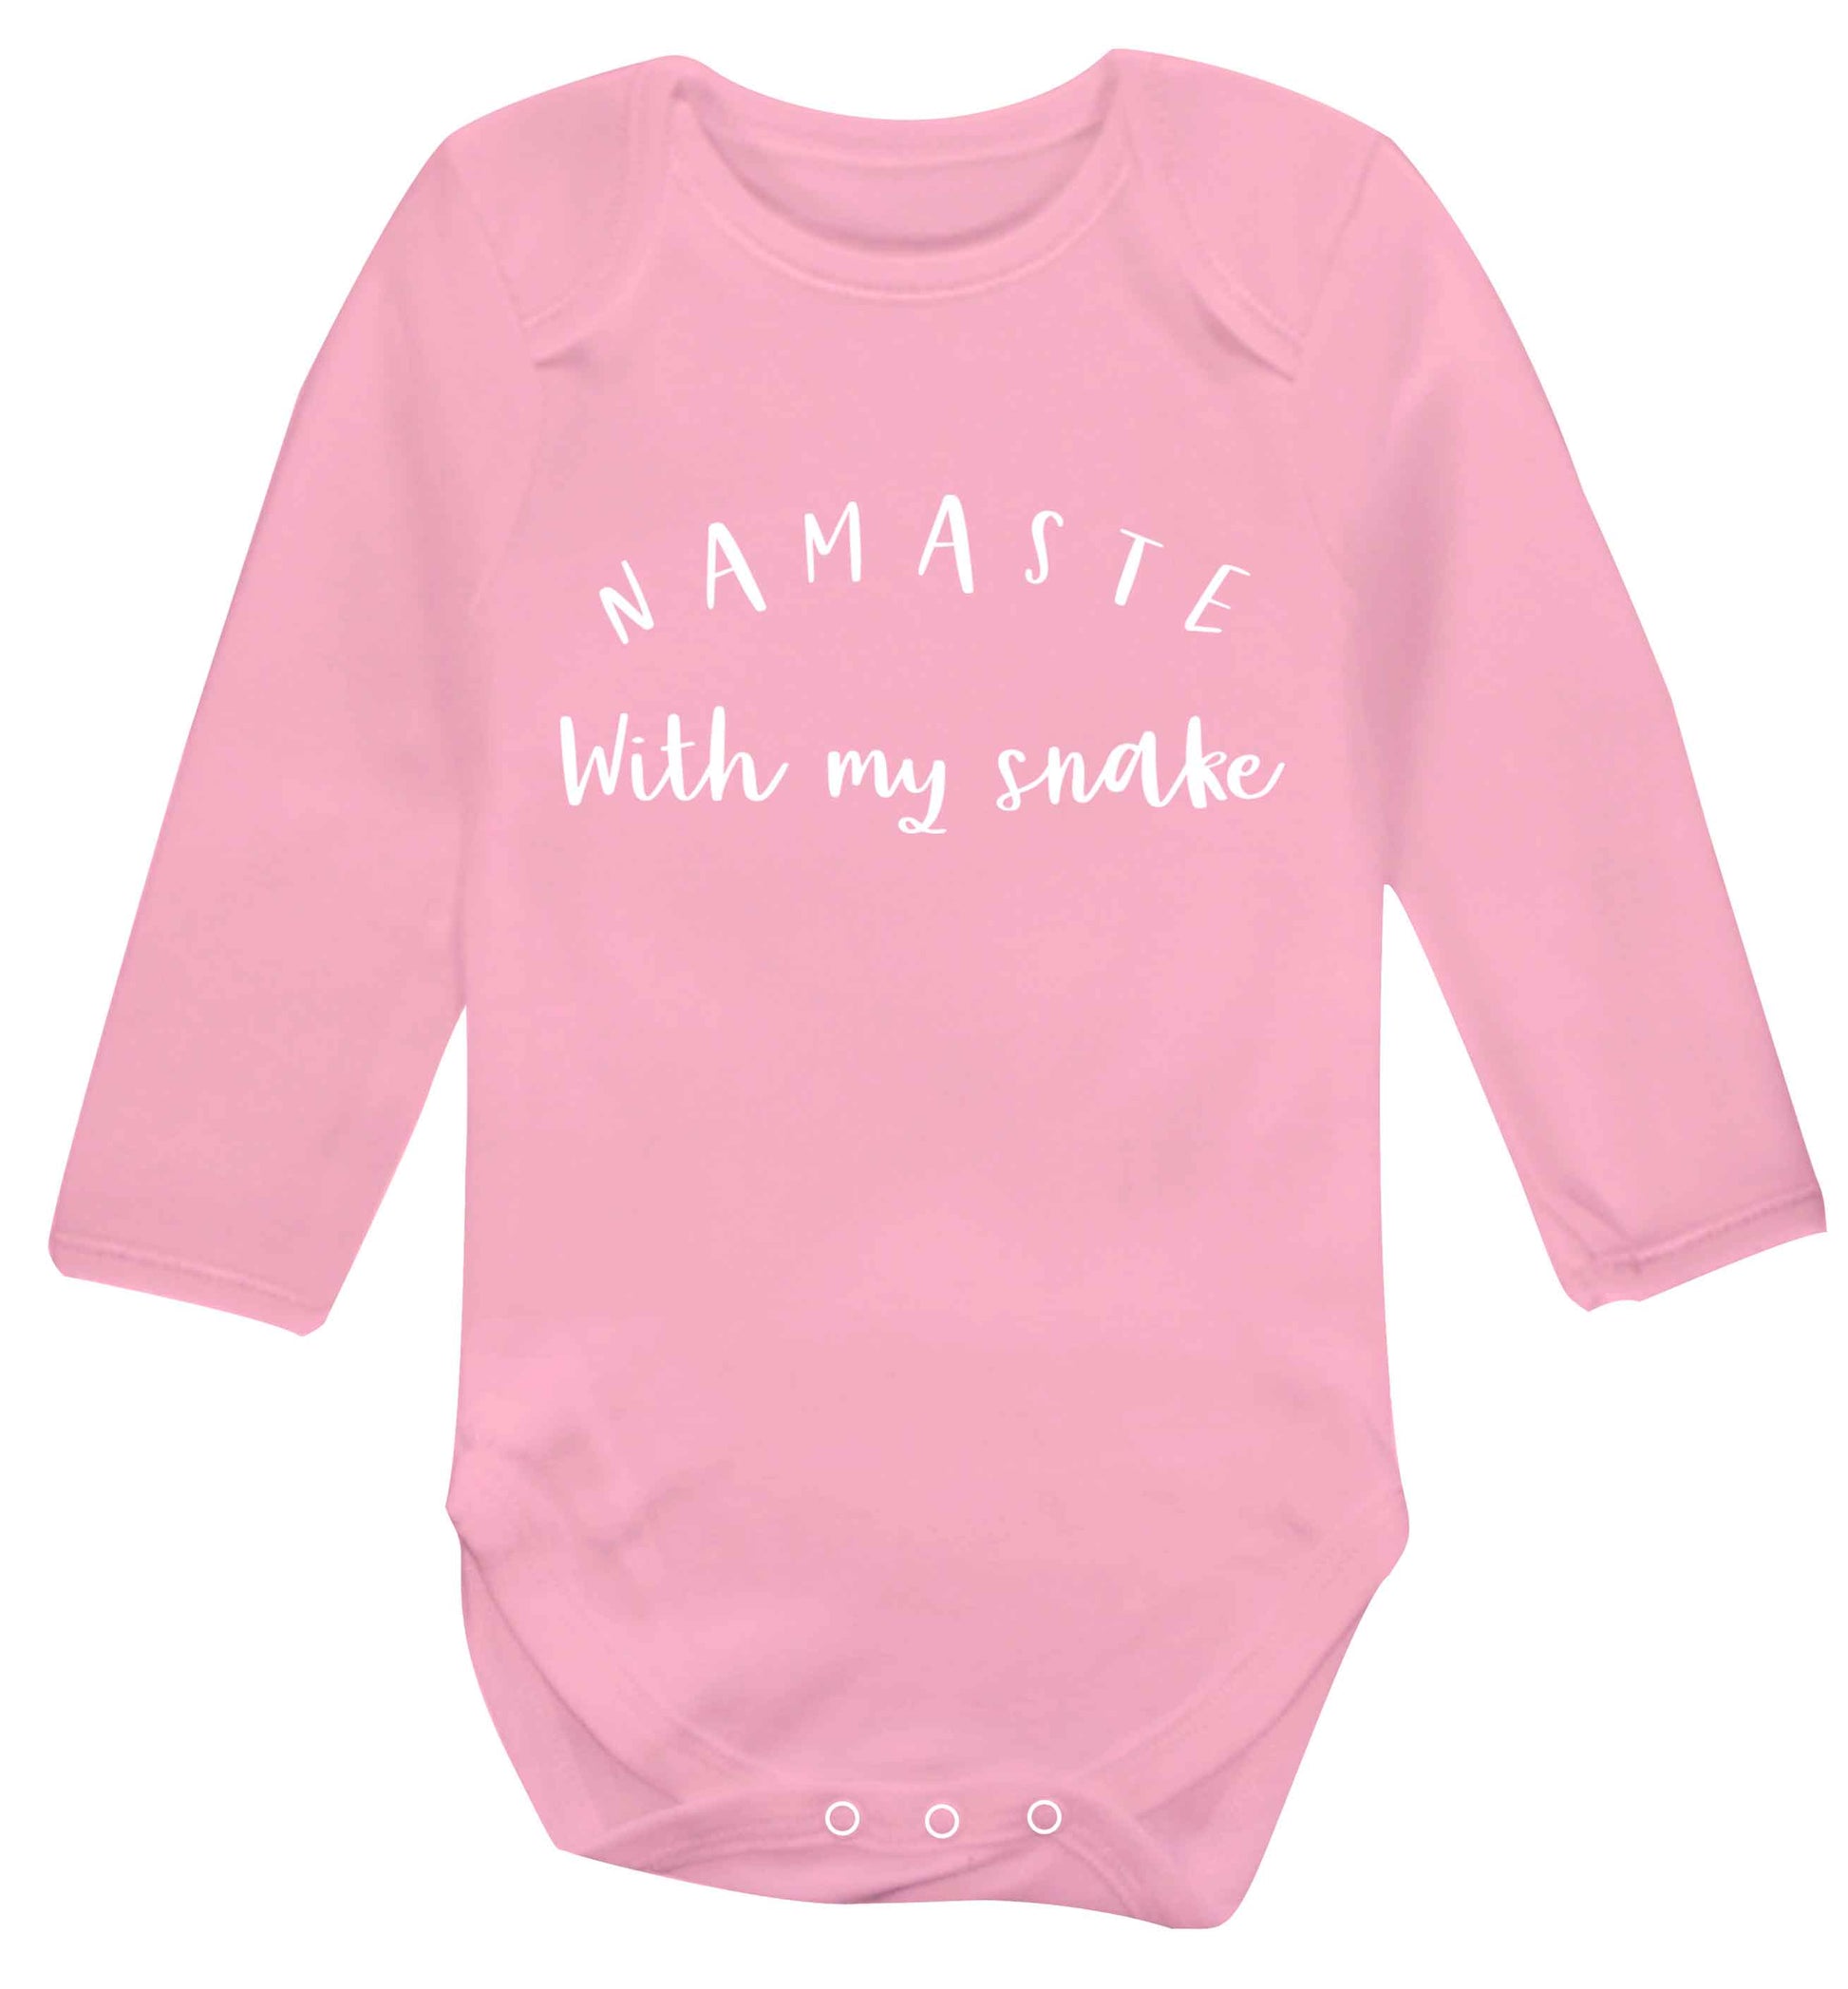 Namaste with my snake Baby Vest long sleeved pale pink 6-12 months